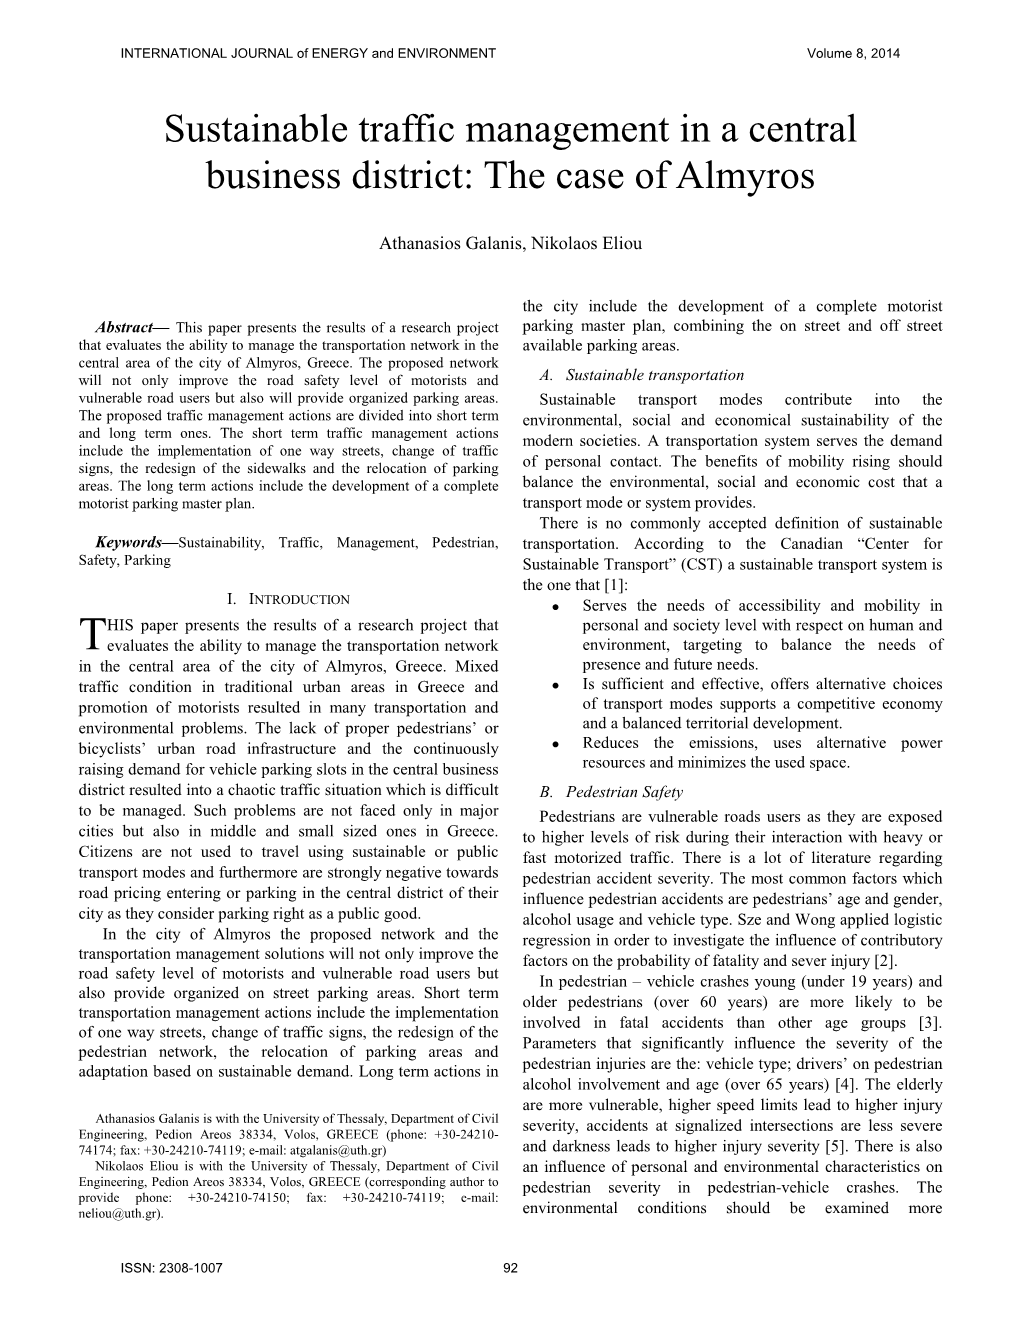 Sustainable Traffic Management in a Central Business District: the Case of Almyros